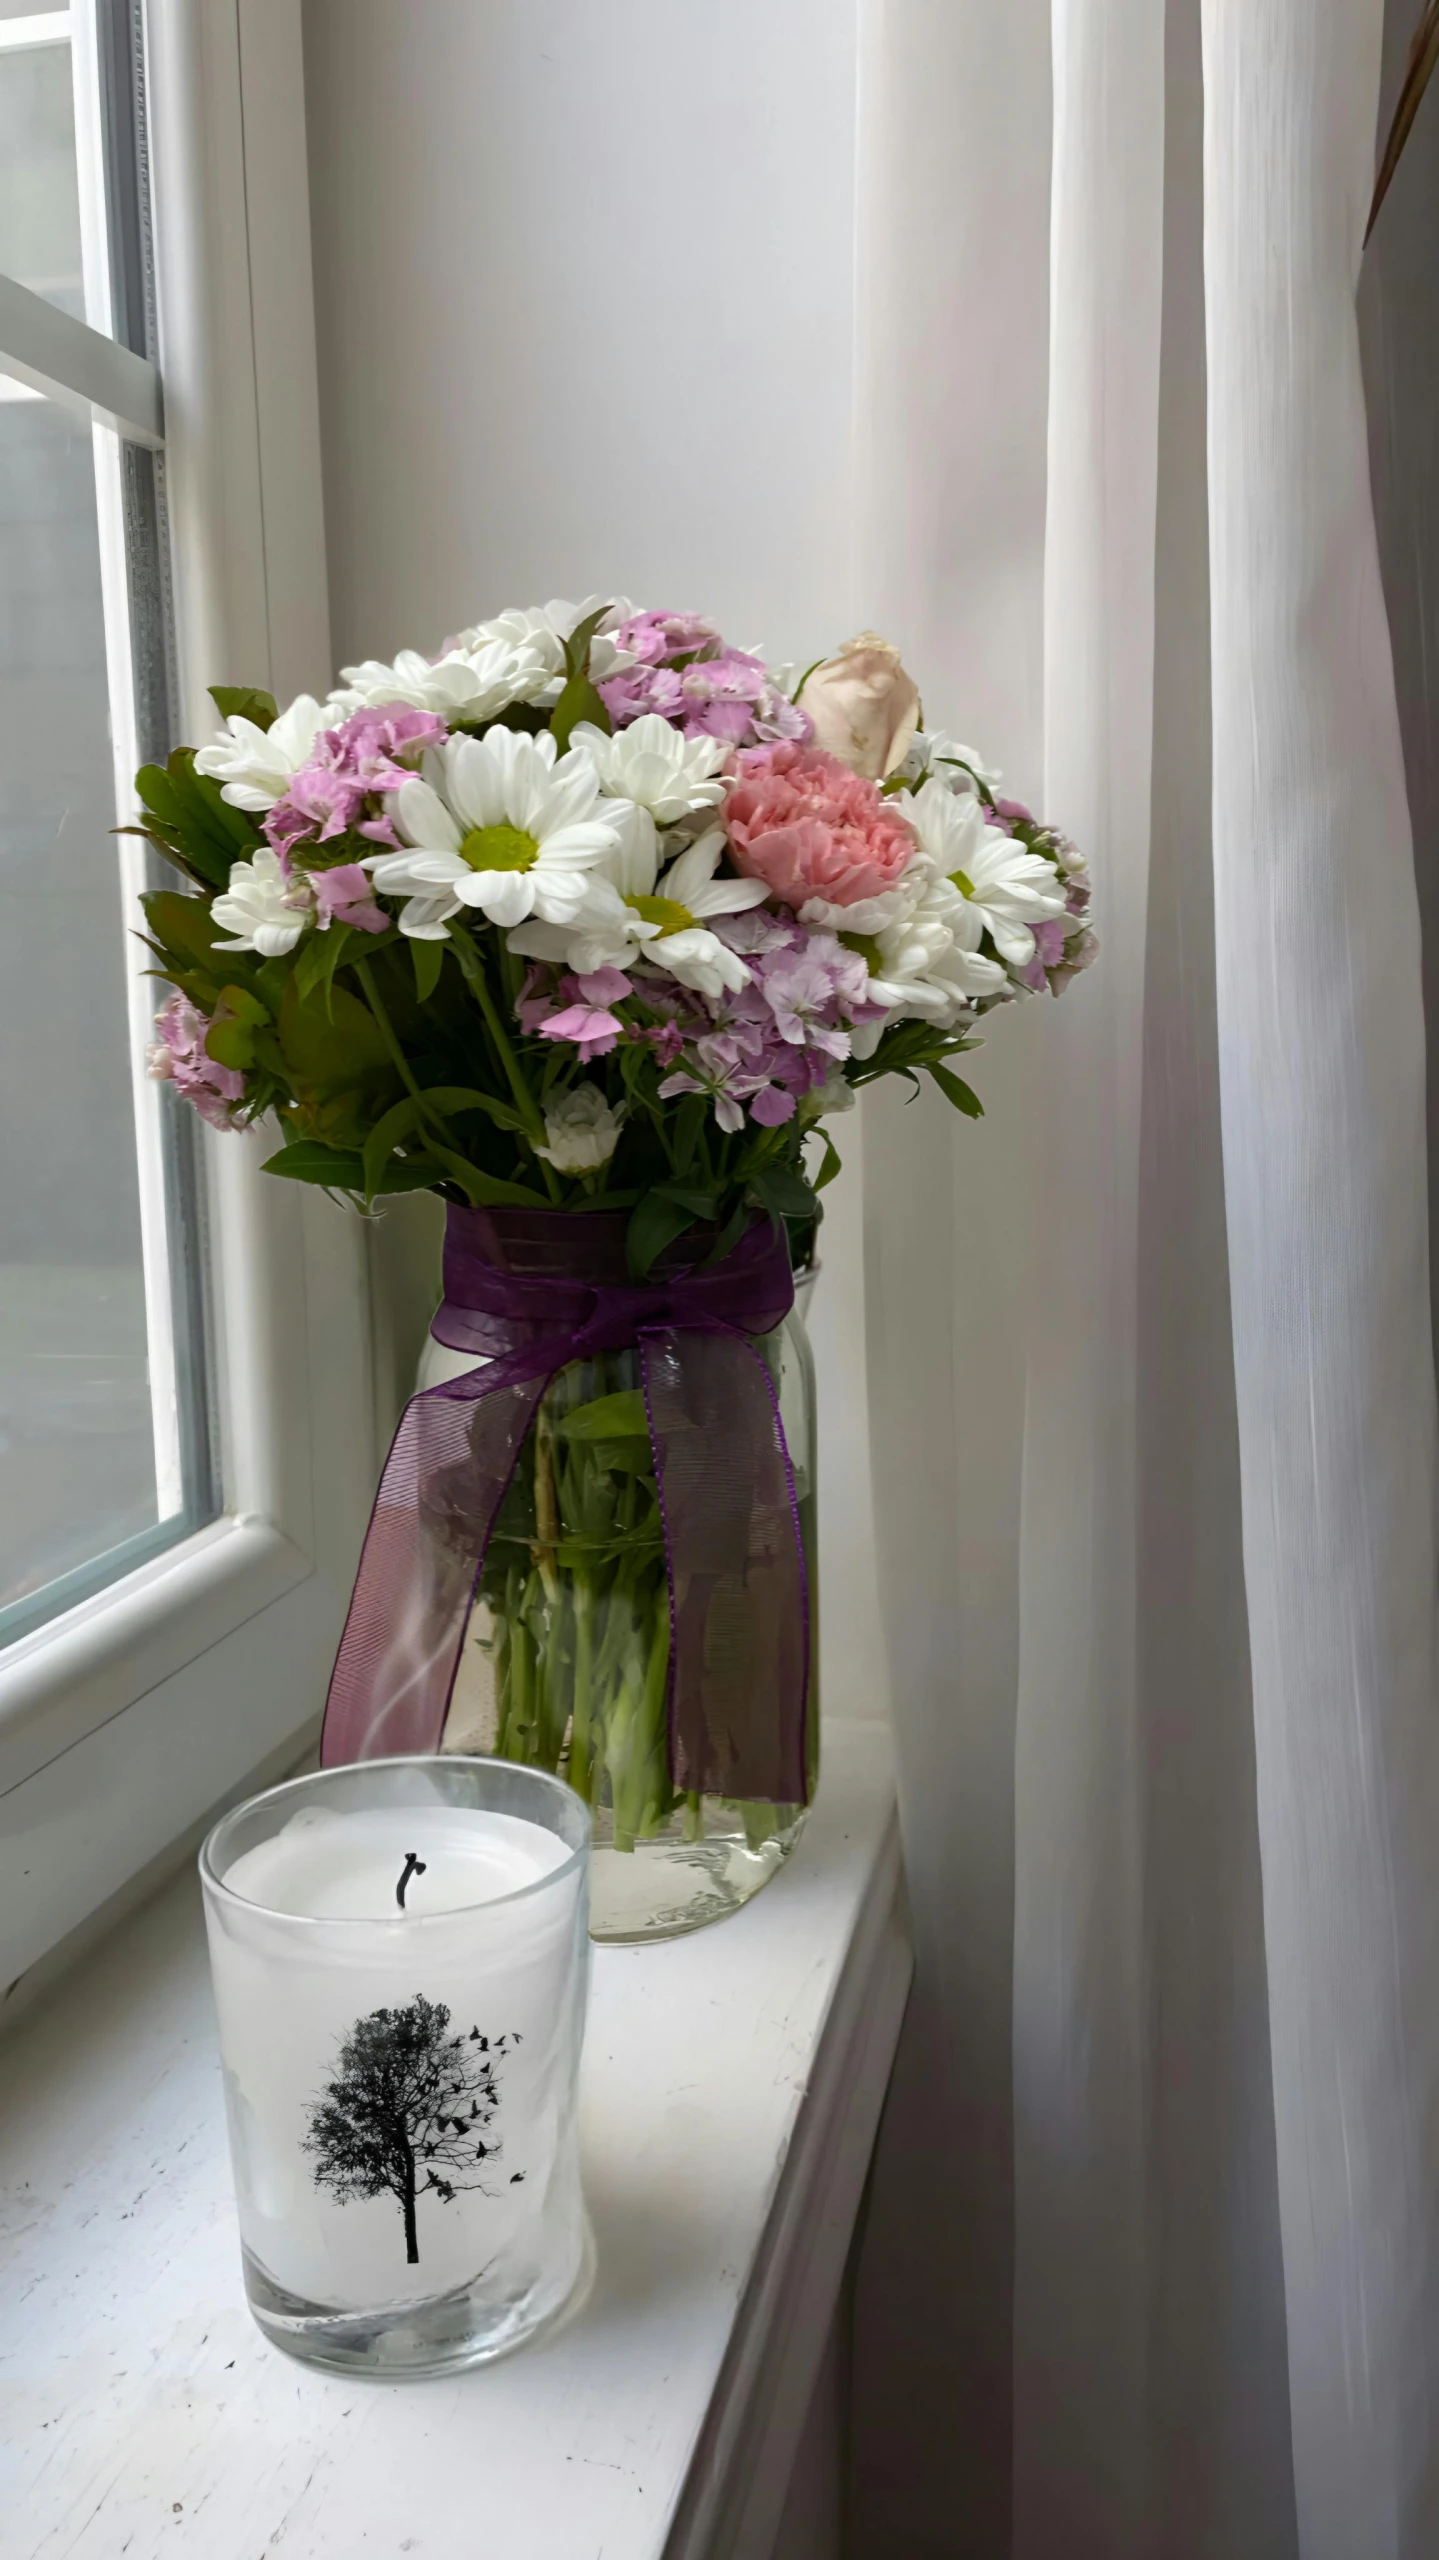 a glass vase with flowers next to a candle